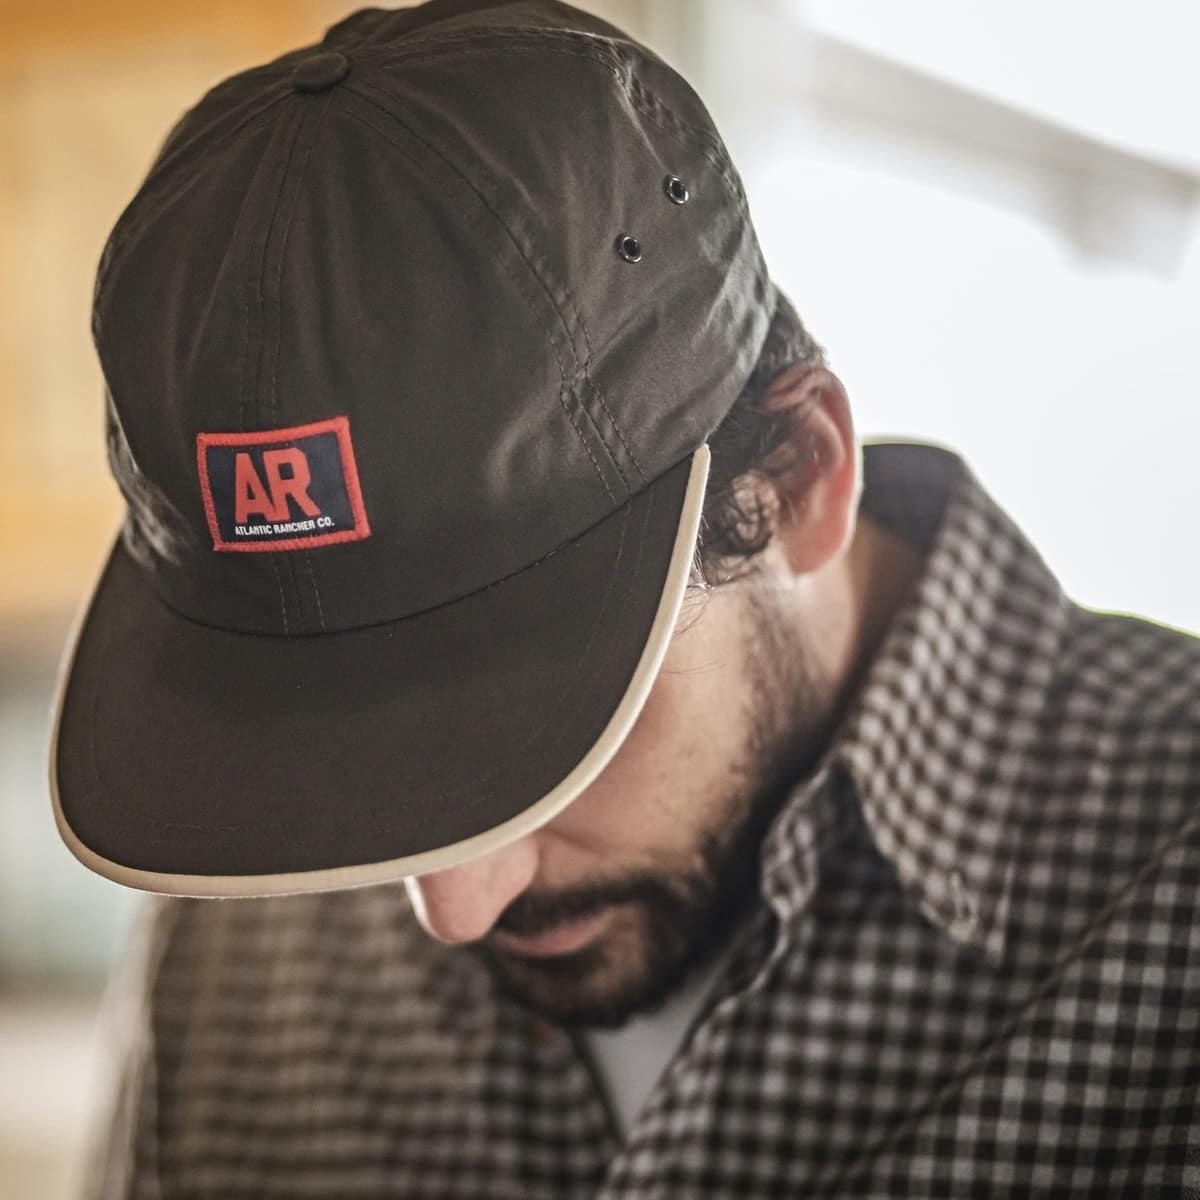 Buy The Limited Edition DryHandle Dock Cap